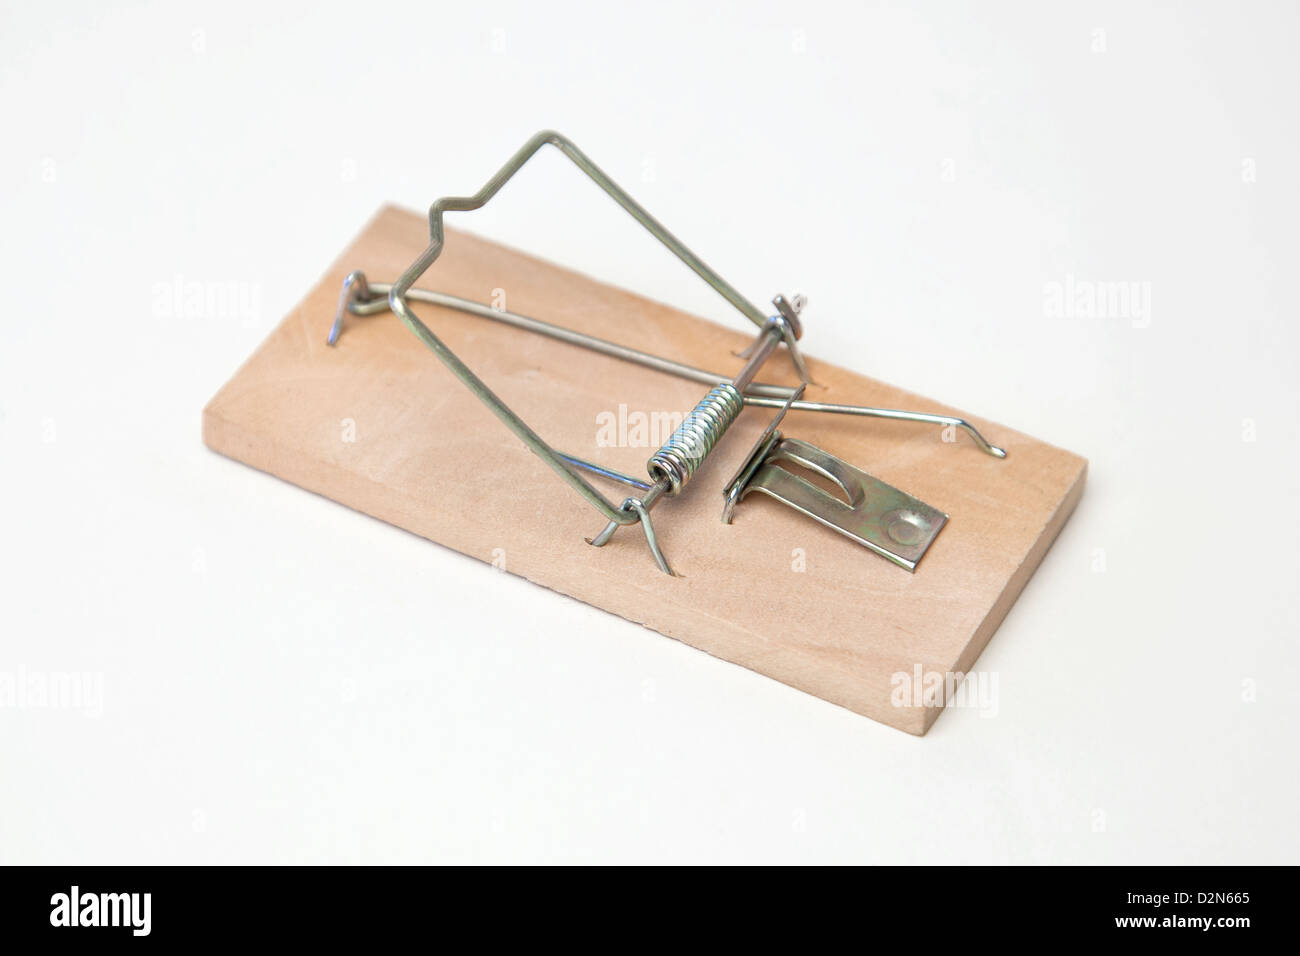 Studio Shot of a mouse trap Stock Photo